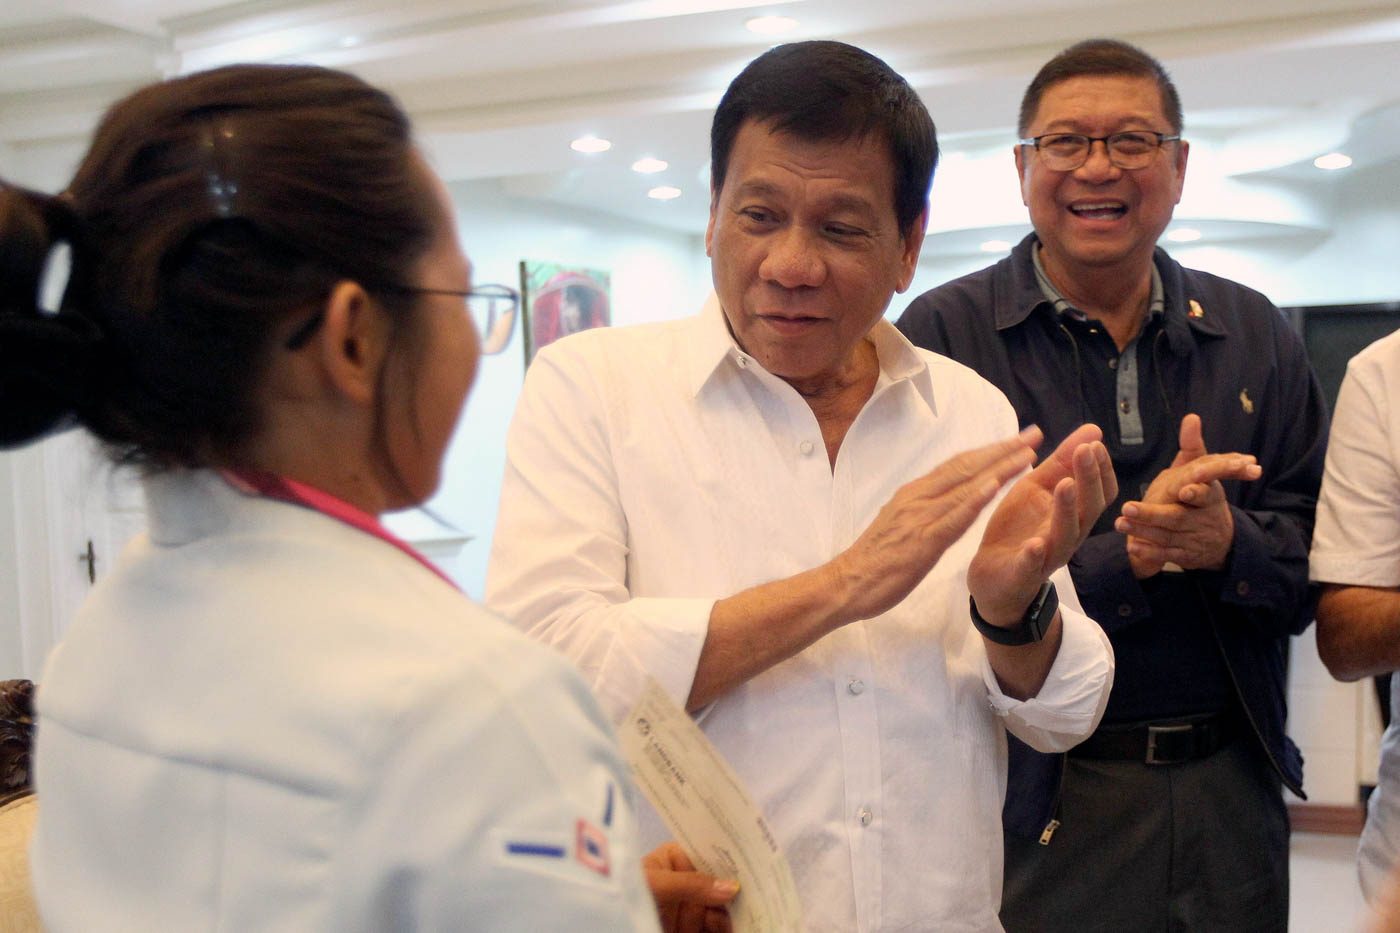 President Rodrigo Duterte and Philippine Sports Commission Chairperson William Ramirez applaud Hidilyn Diaz, the first Filipina and Mindanaoan Olympic silver medalist, during a courtesy call at the Presidential Guest House in Panacan, Davao City on August 11. Photo by Ace Morandante/PPD  